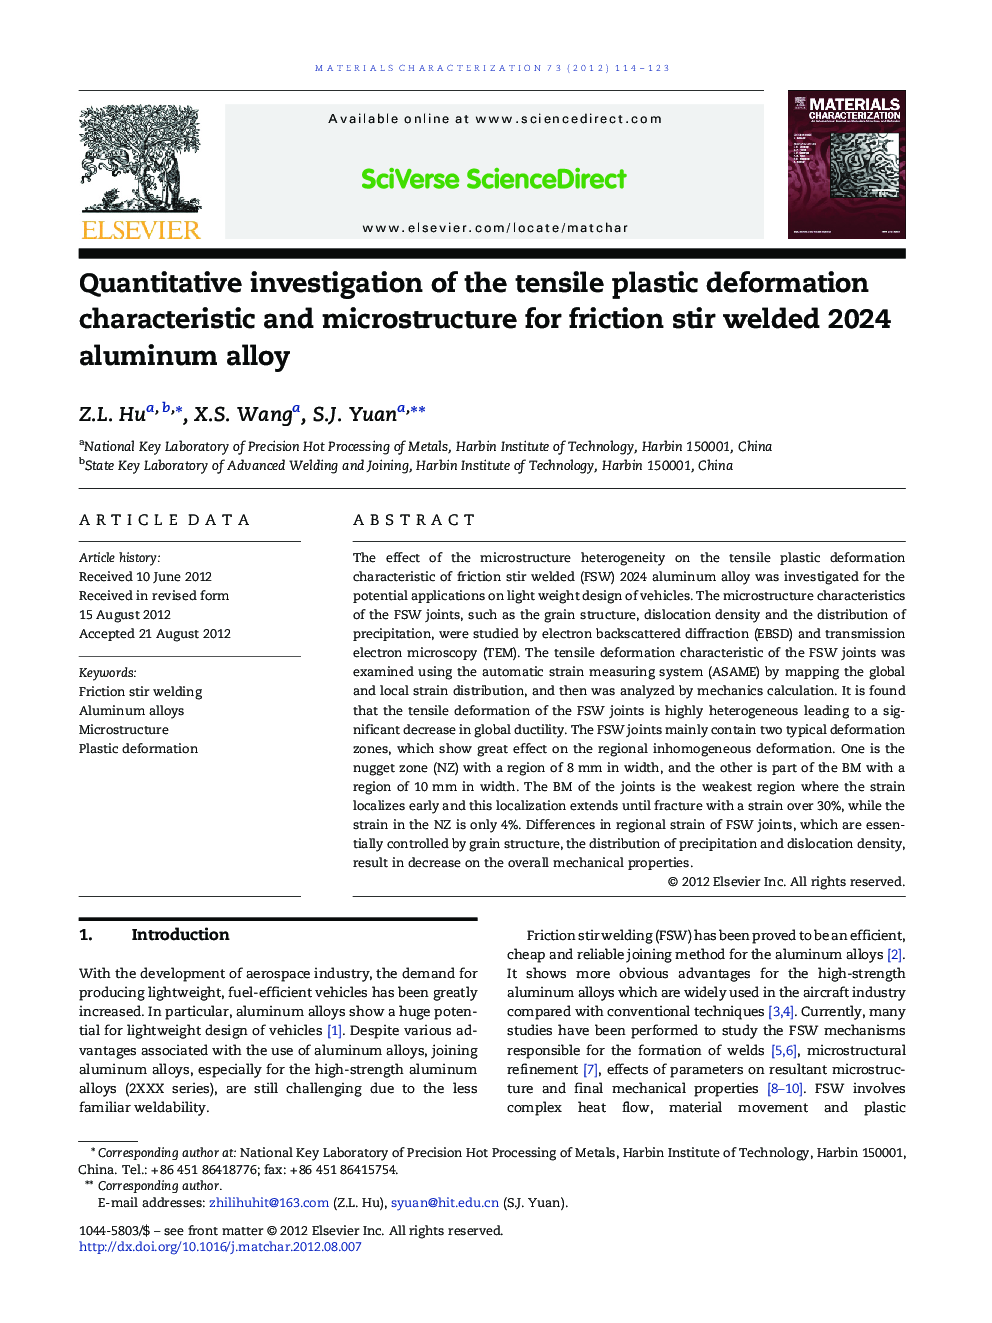 Quantitative investigation of the tensile plastic deformation characteristic and microstructure for friction stir welded 2024 aluminum alloy